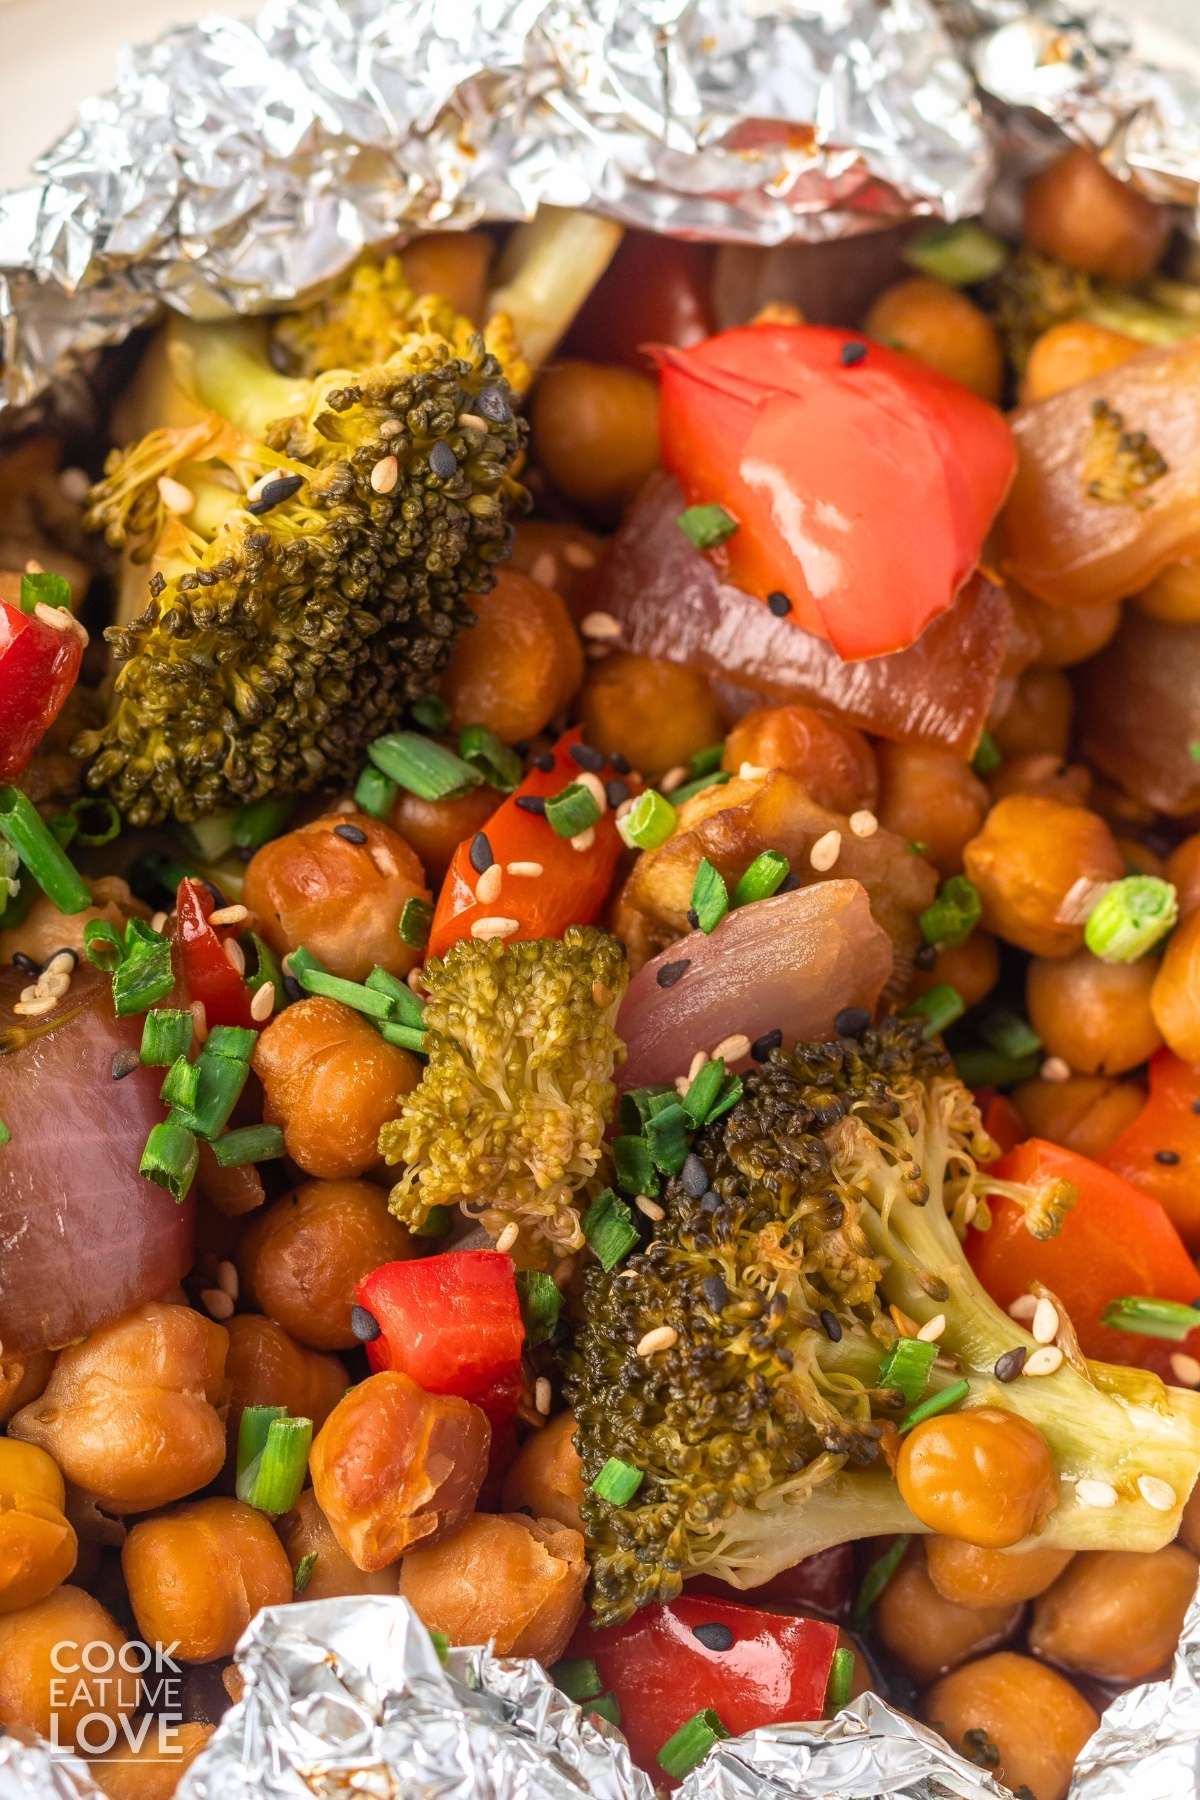 A close up view of cooked vegetables and chickpeas when foil pack is opened.